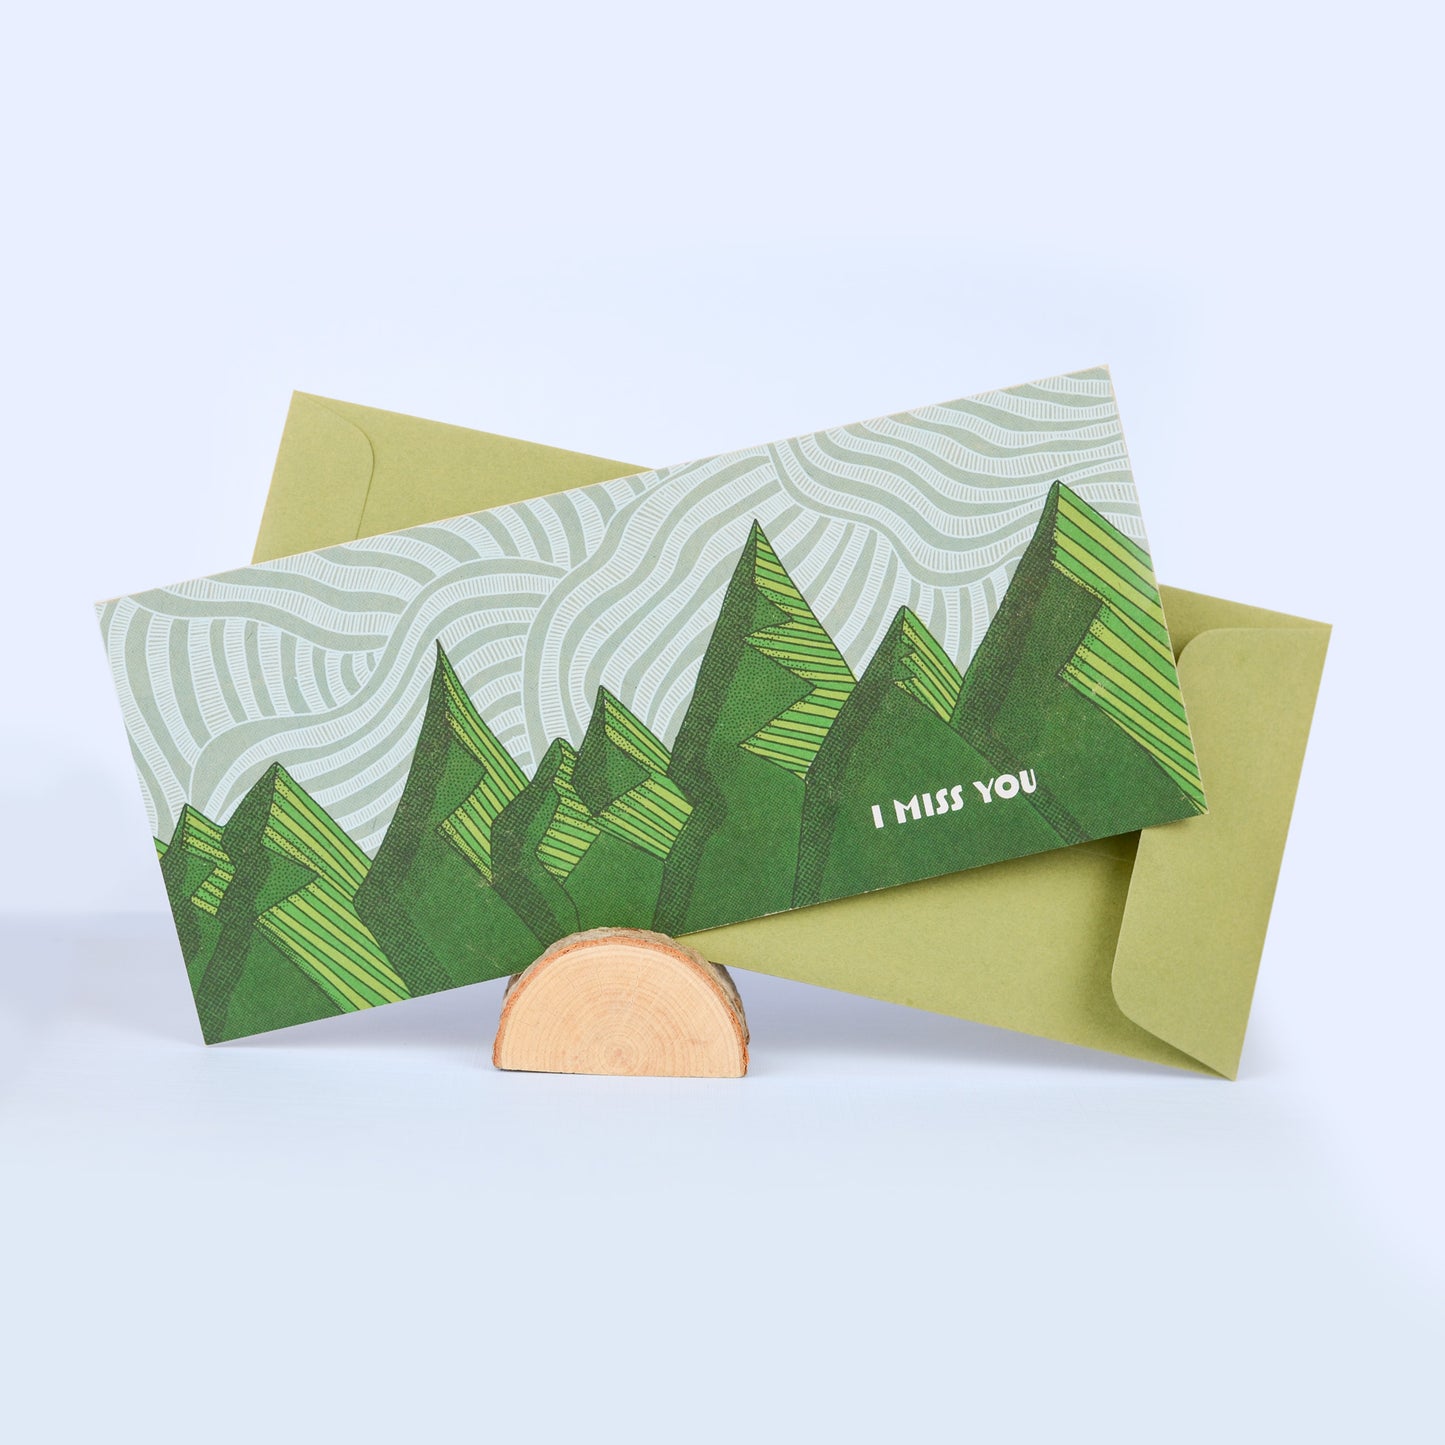 Miss You Card - Mountains